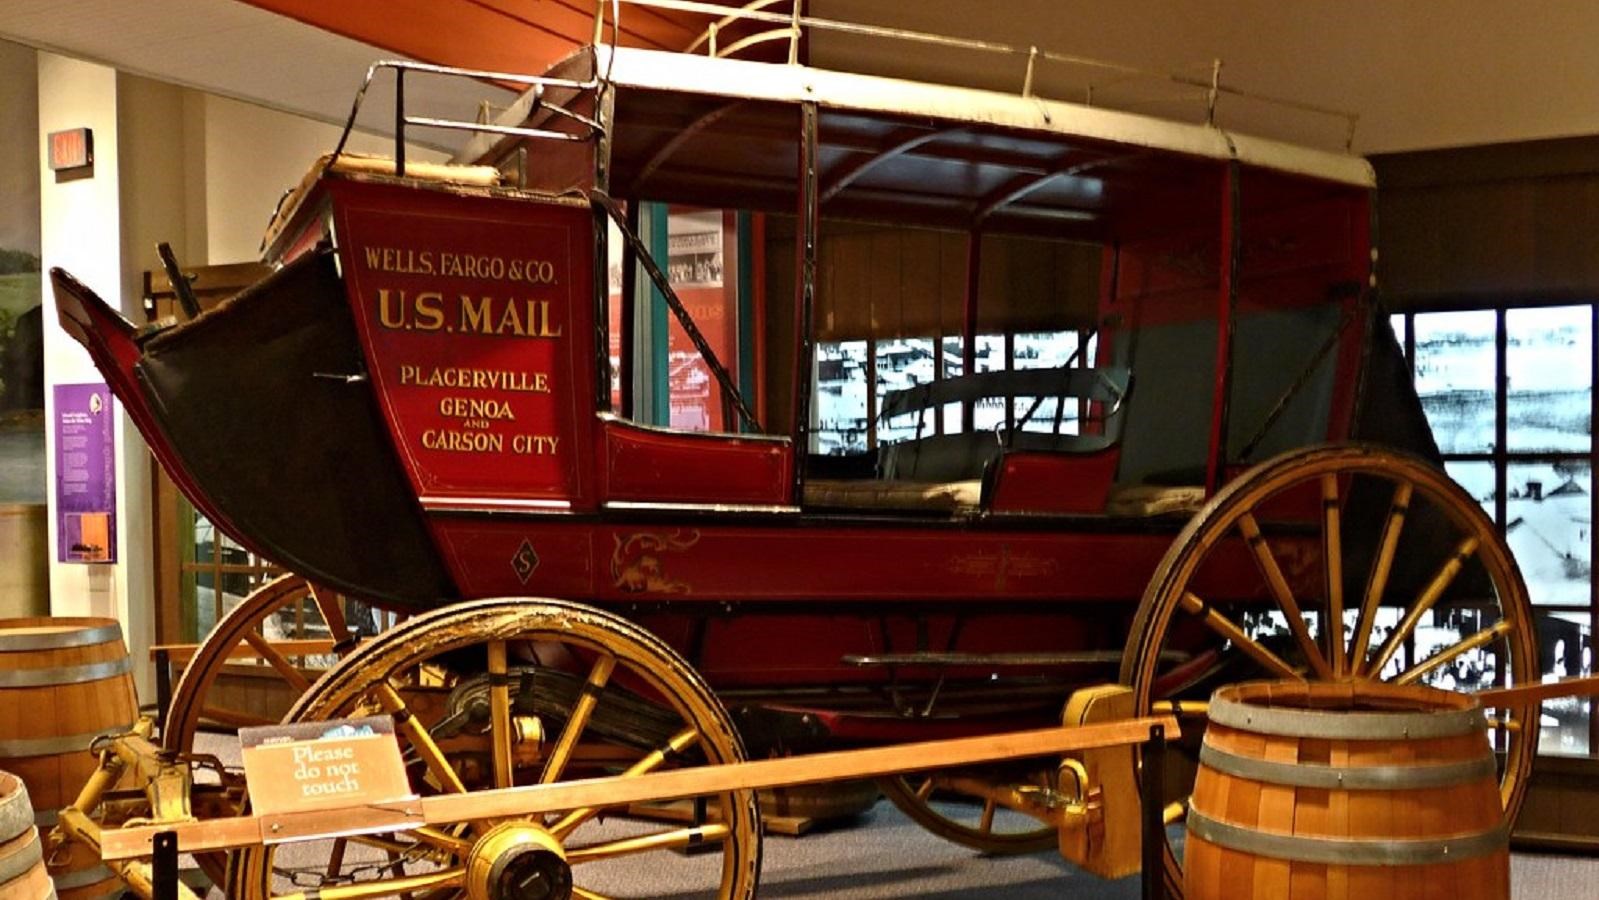 A barrel sits by a 19th century U.S. Mail stagecoach on display in the museum